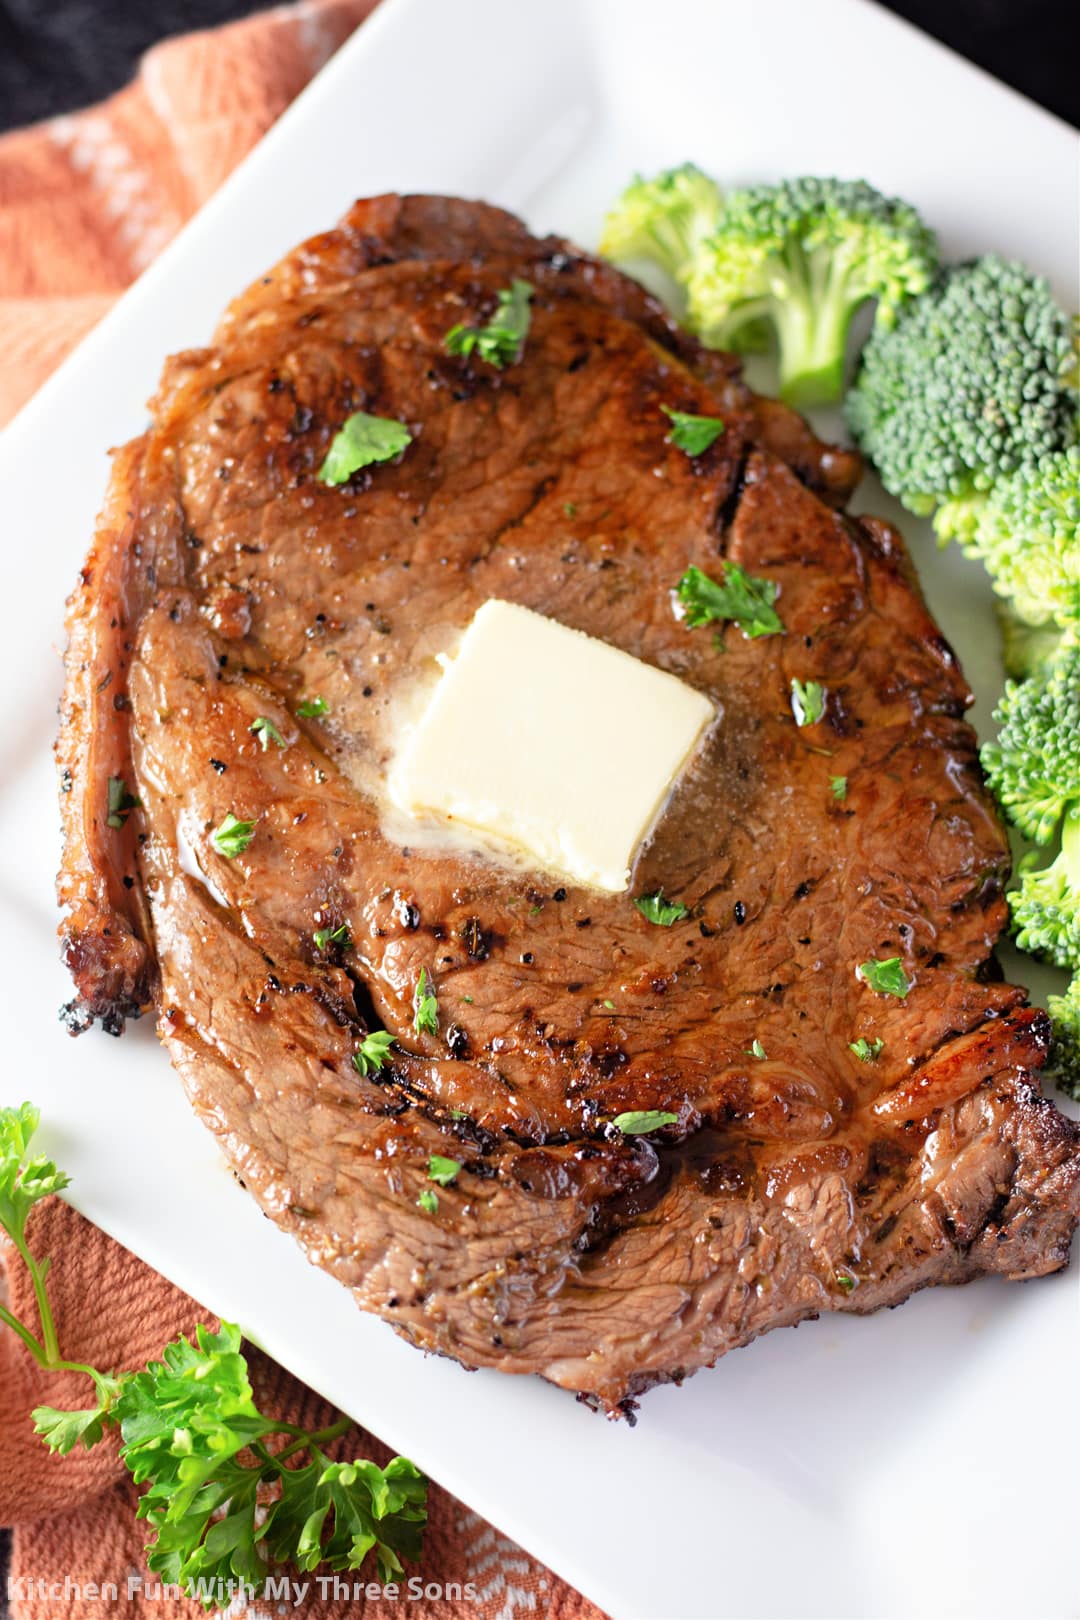 freshly made steak with butter and broccoli.